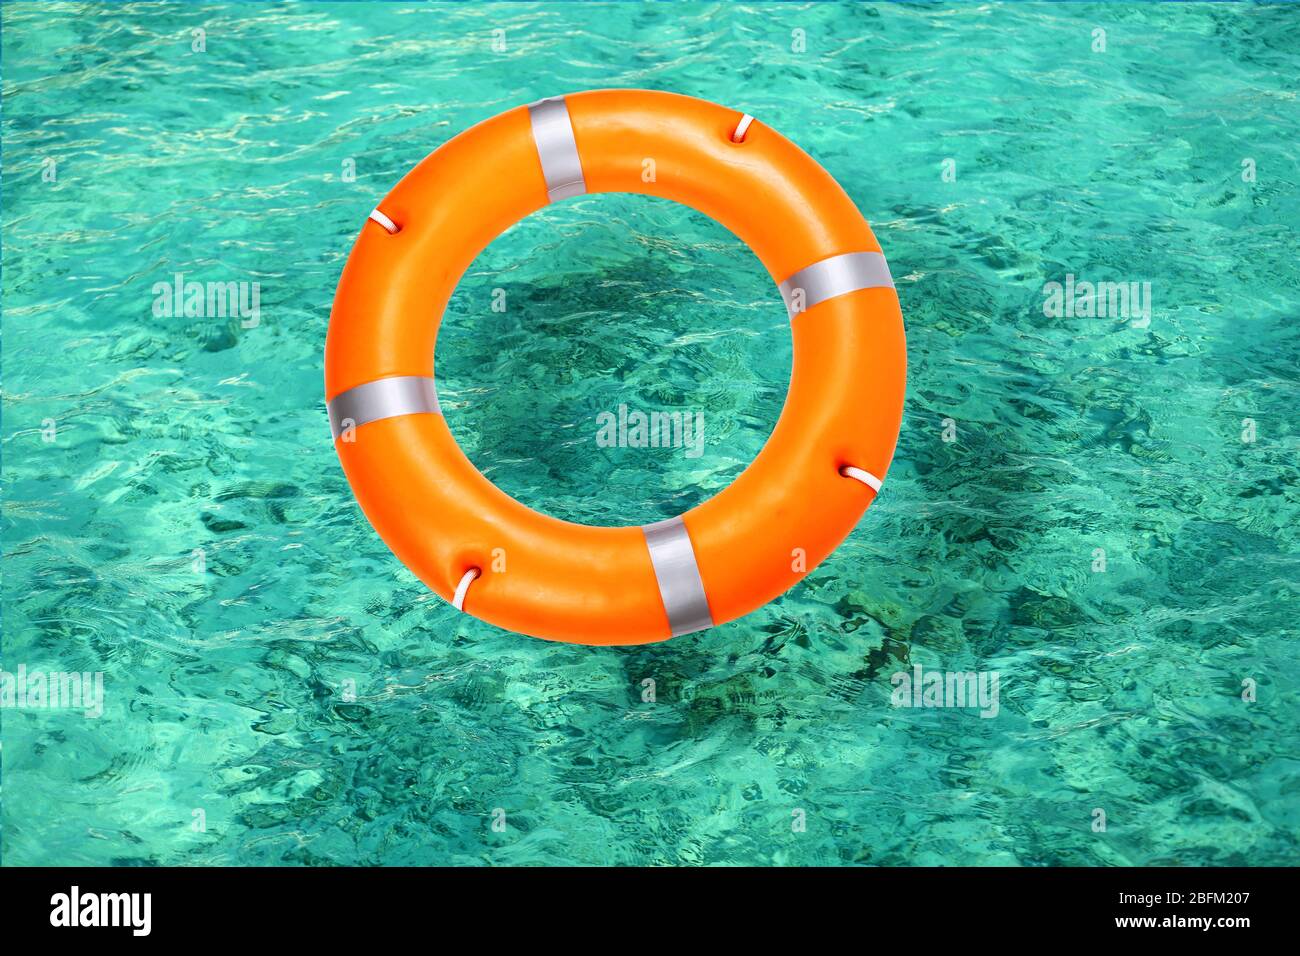 A life buoy for safety at sea Stock Photo